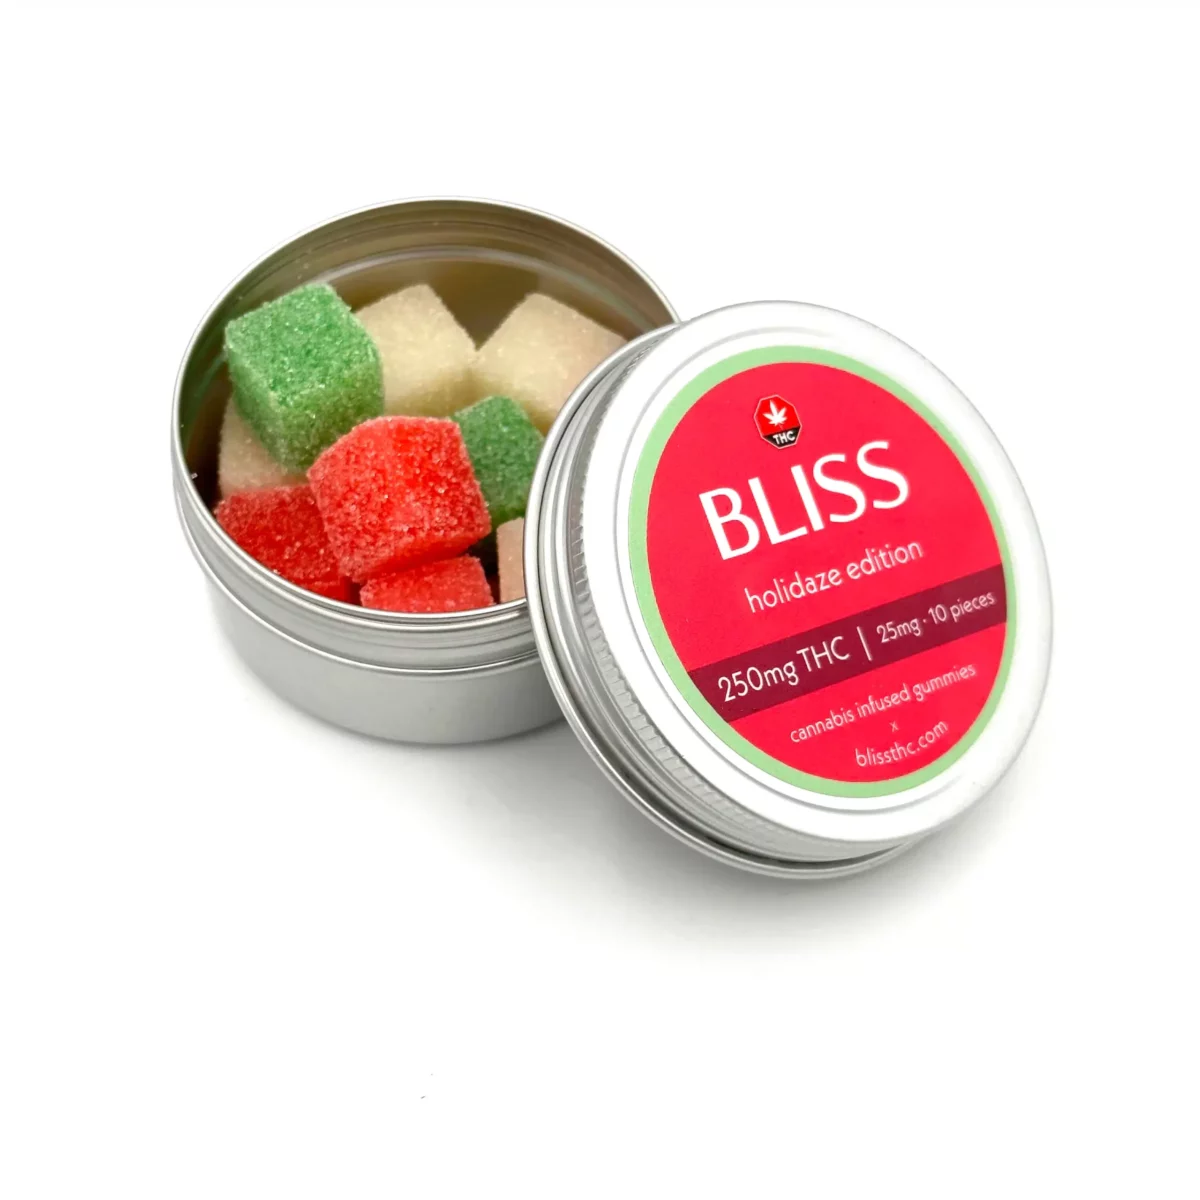 BLISS HOLIDAZE COLLECTION | My Green Solution